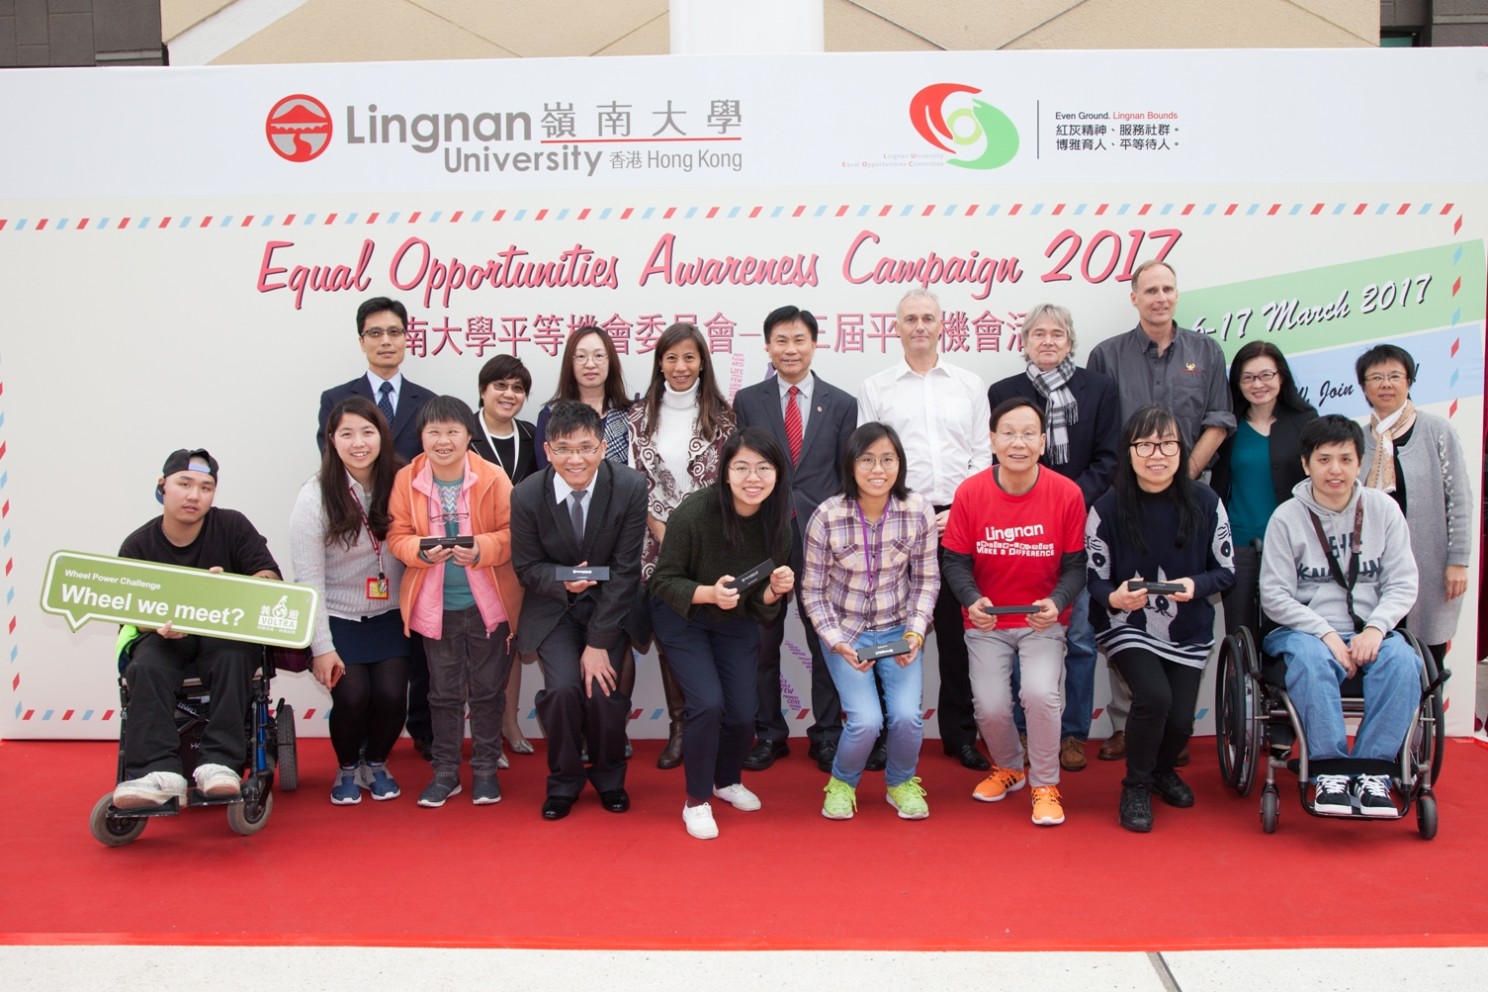 President Prof Leonard Cheng (5th left, back row), Prof Lisa Leung Yuk-ming, Chairperson of the Lingnan University Equal Opportunities Committee (4th left, back row), and other guests participated in the kick-off ceremony of Lingnan University’s 3rd Equal